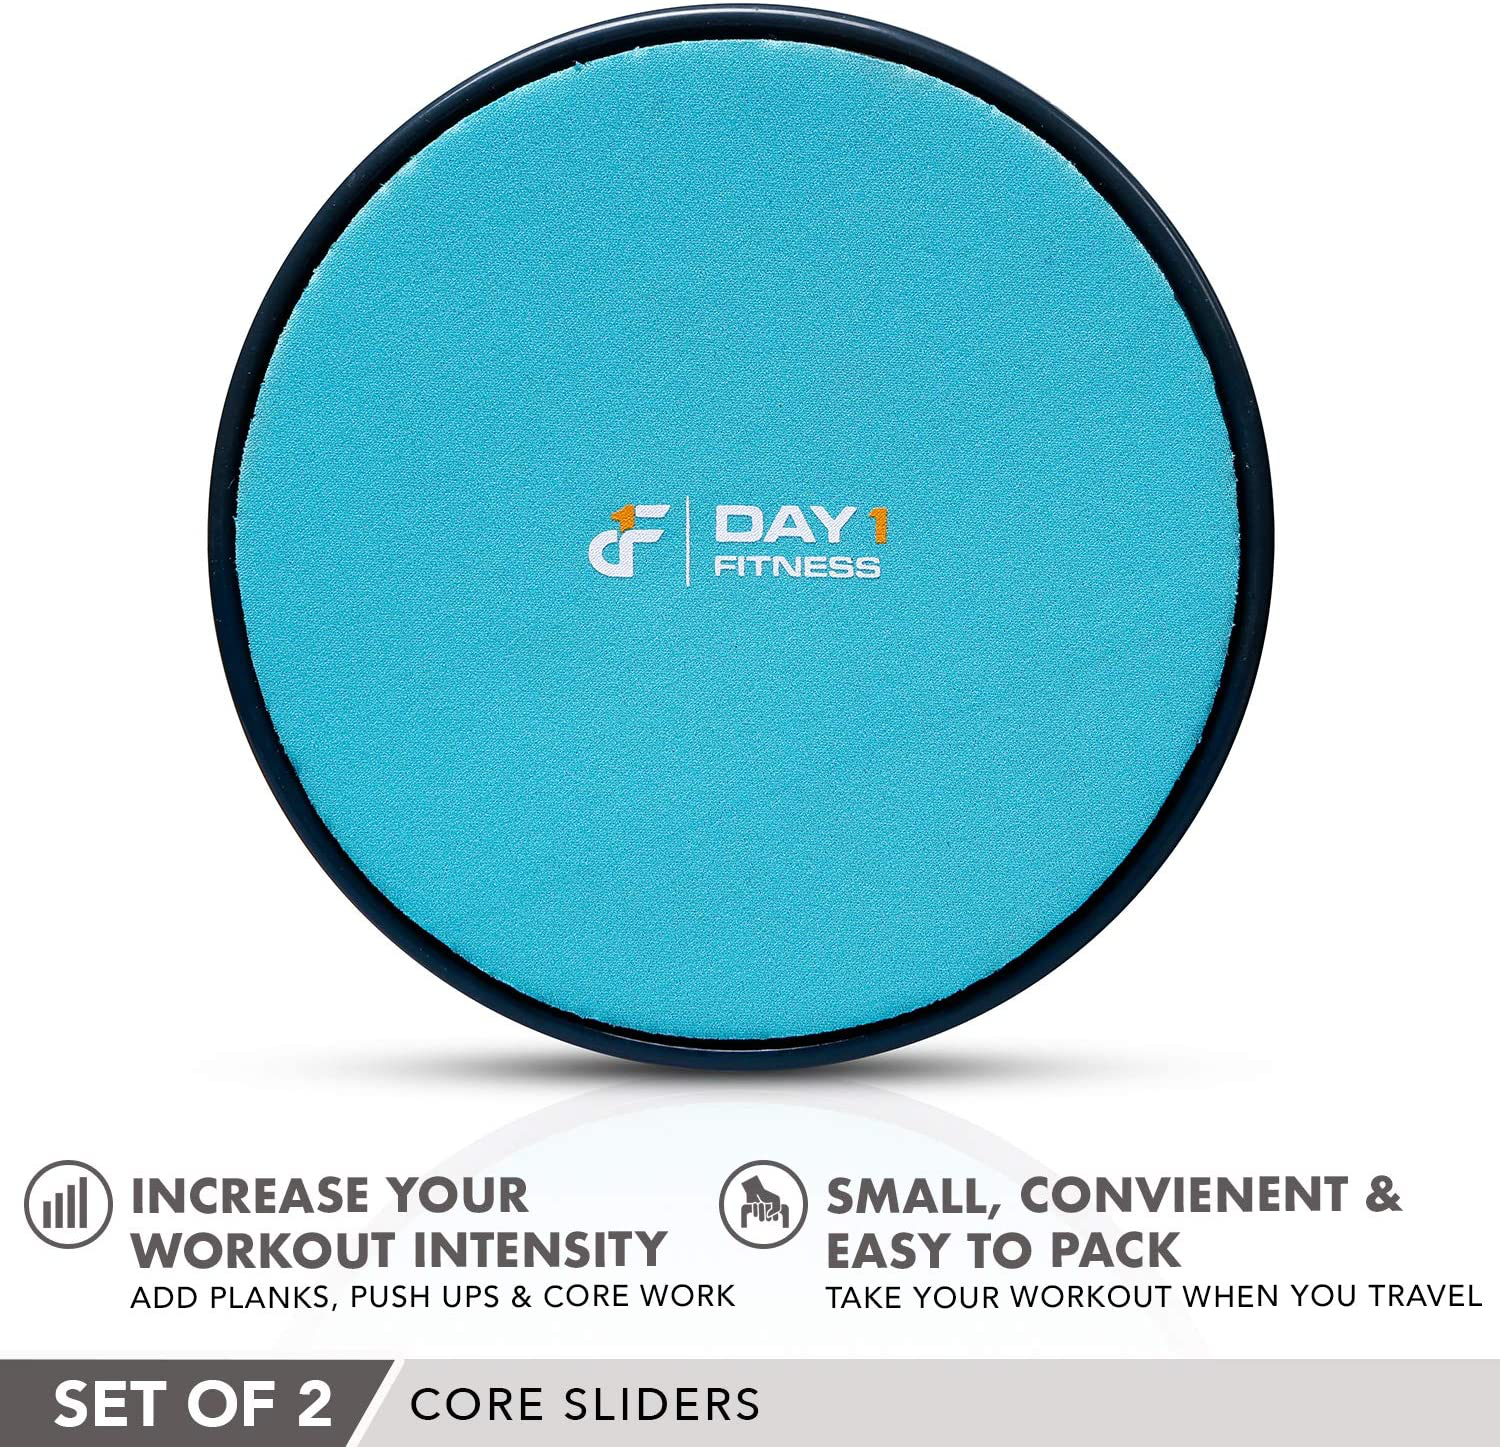 Core Sliders by Day 1 Fitness, Set of 2 Black/Mint, Dual Sided for Carpet and Hard Floors - Premium, Multipurpose Gliding Discs to Strengthen Abs, Lower Back - Portable Abdominal Equipment